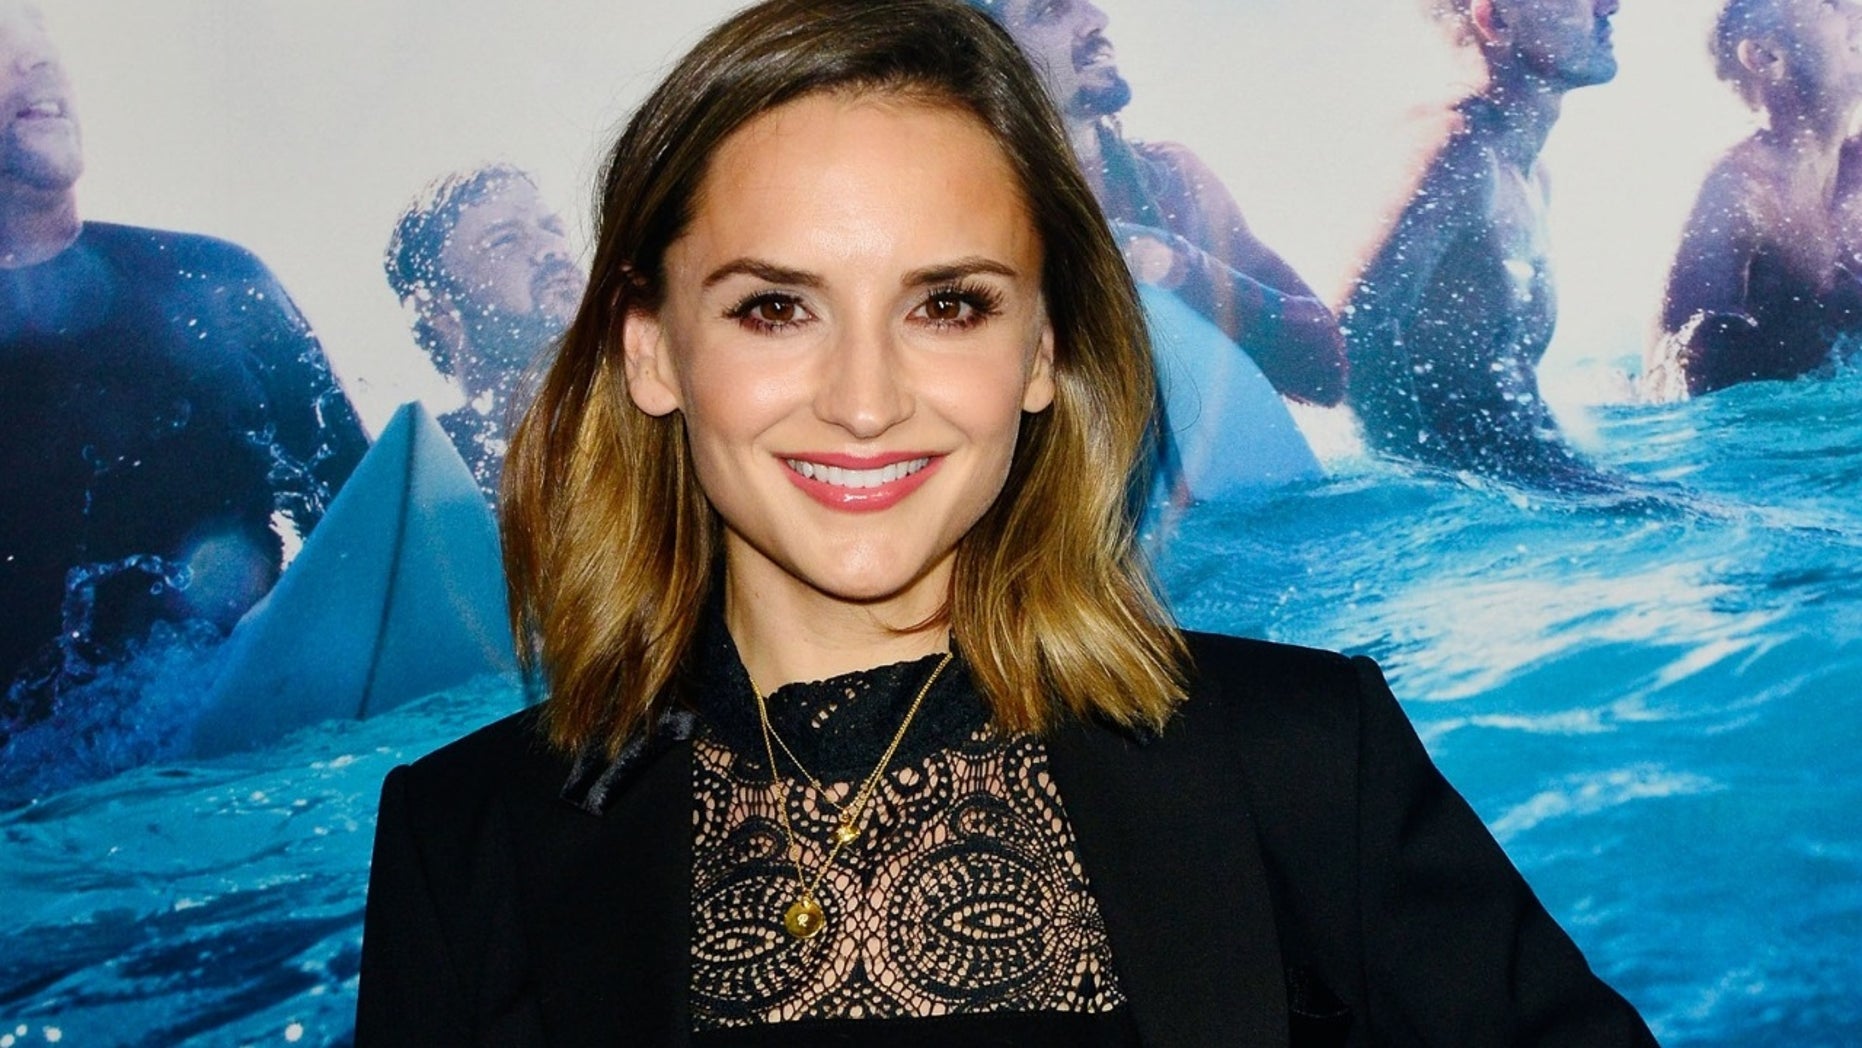 ‘She’s All That’ actress Rachael Leigh Cook recalls starring in the 